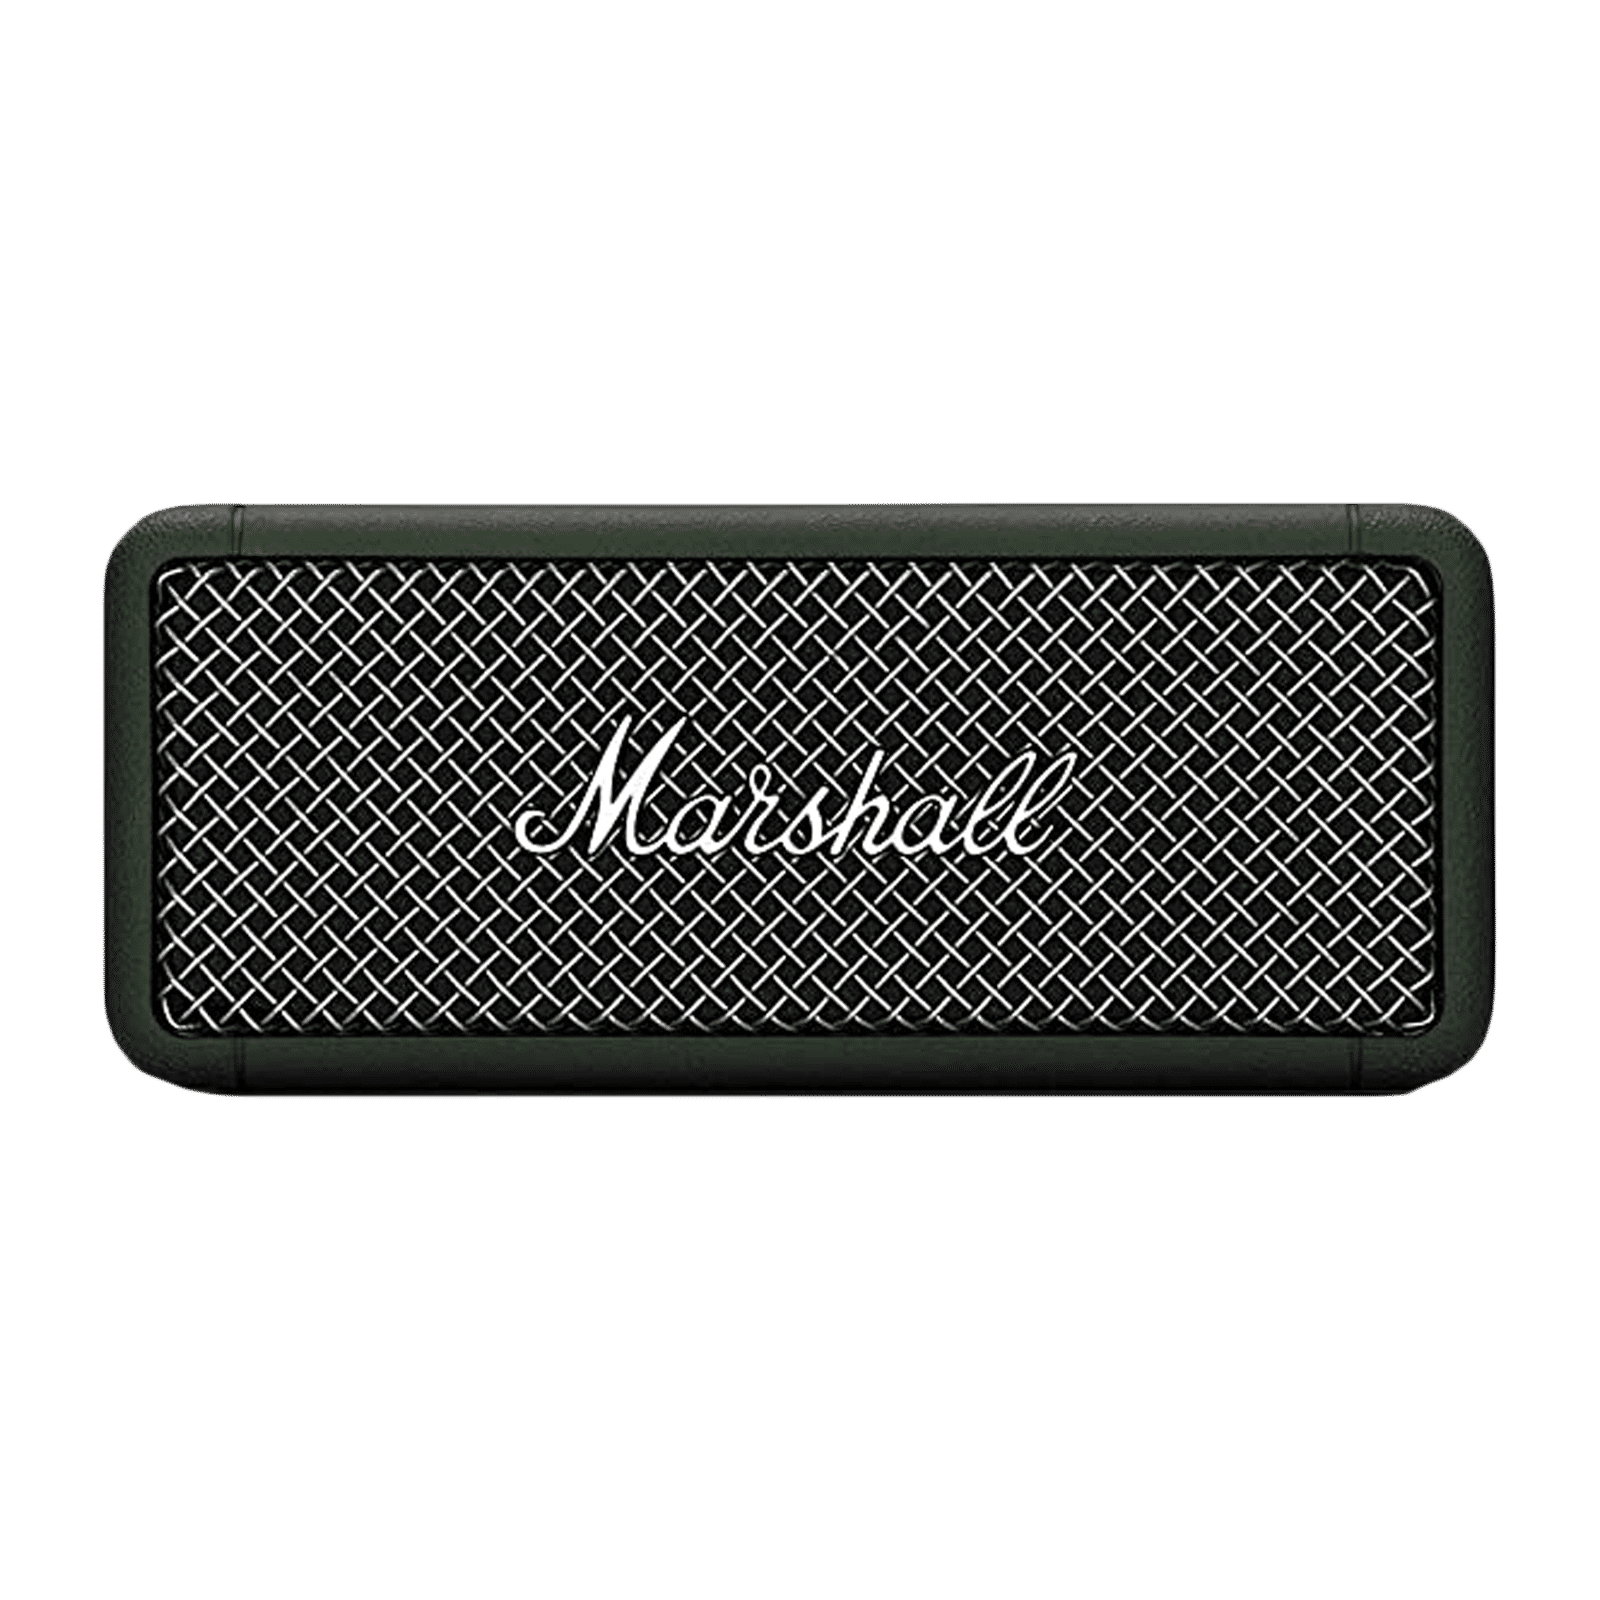 Buy Marshall Capability, (Fast Bluetooth Speaker Watts Online - 20 Emberton Forest) Charging MS-EMBRN-FRST, Portable Croma